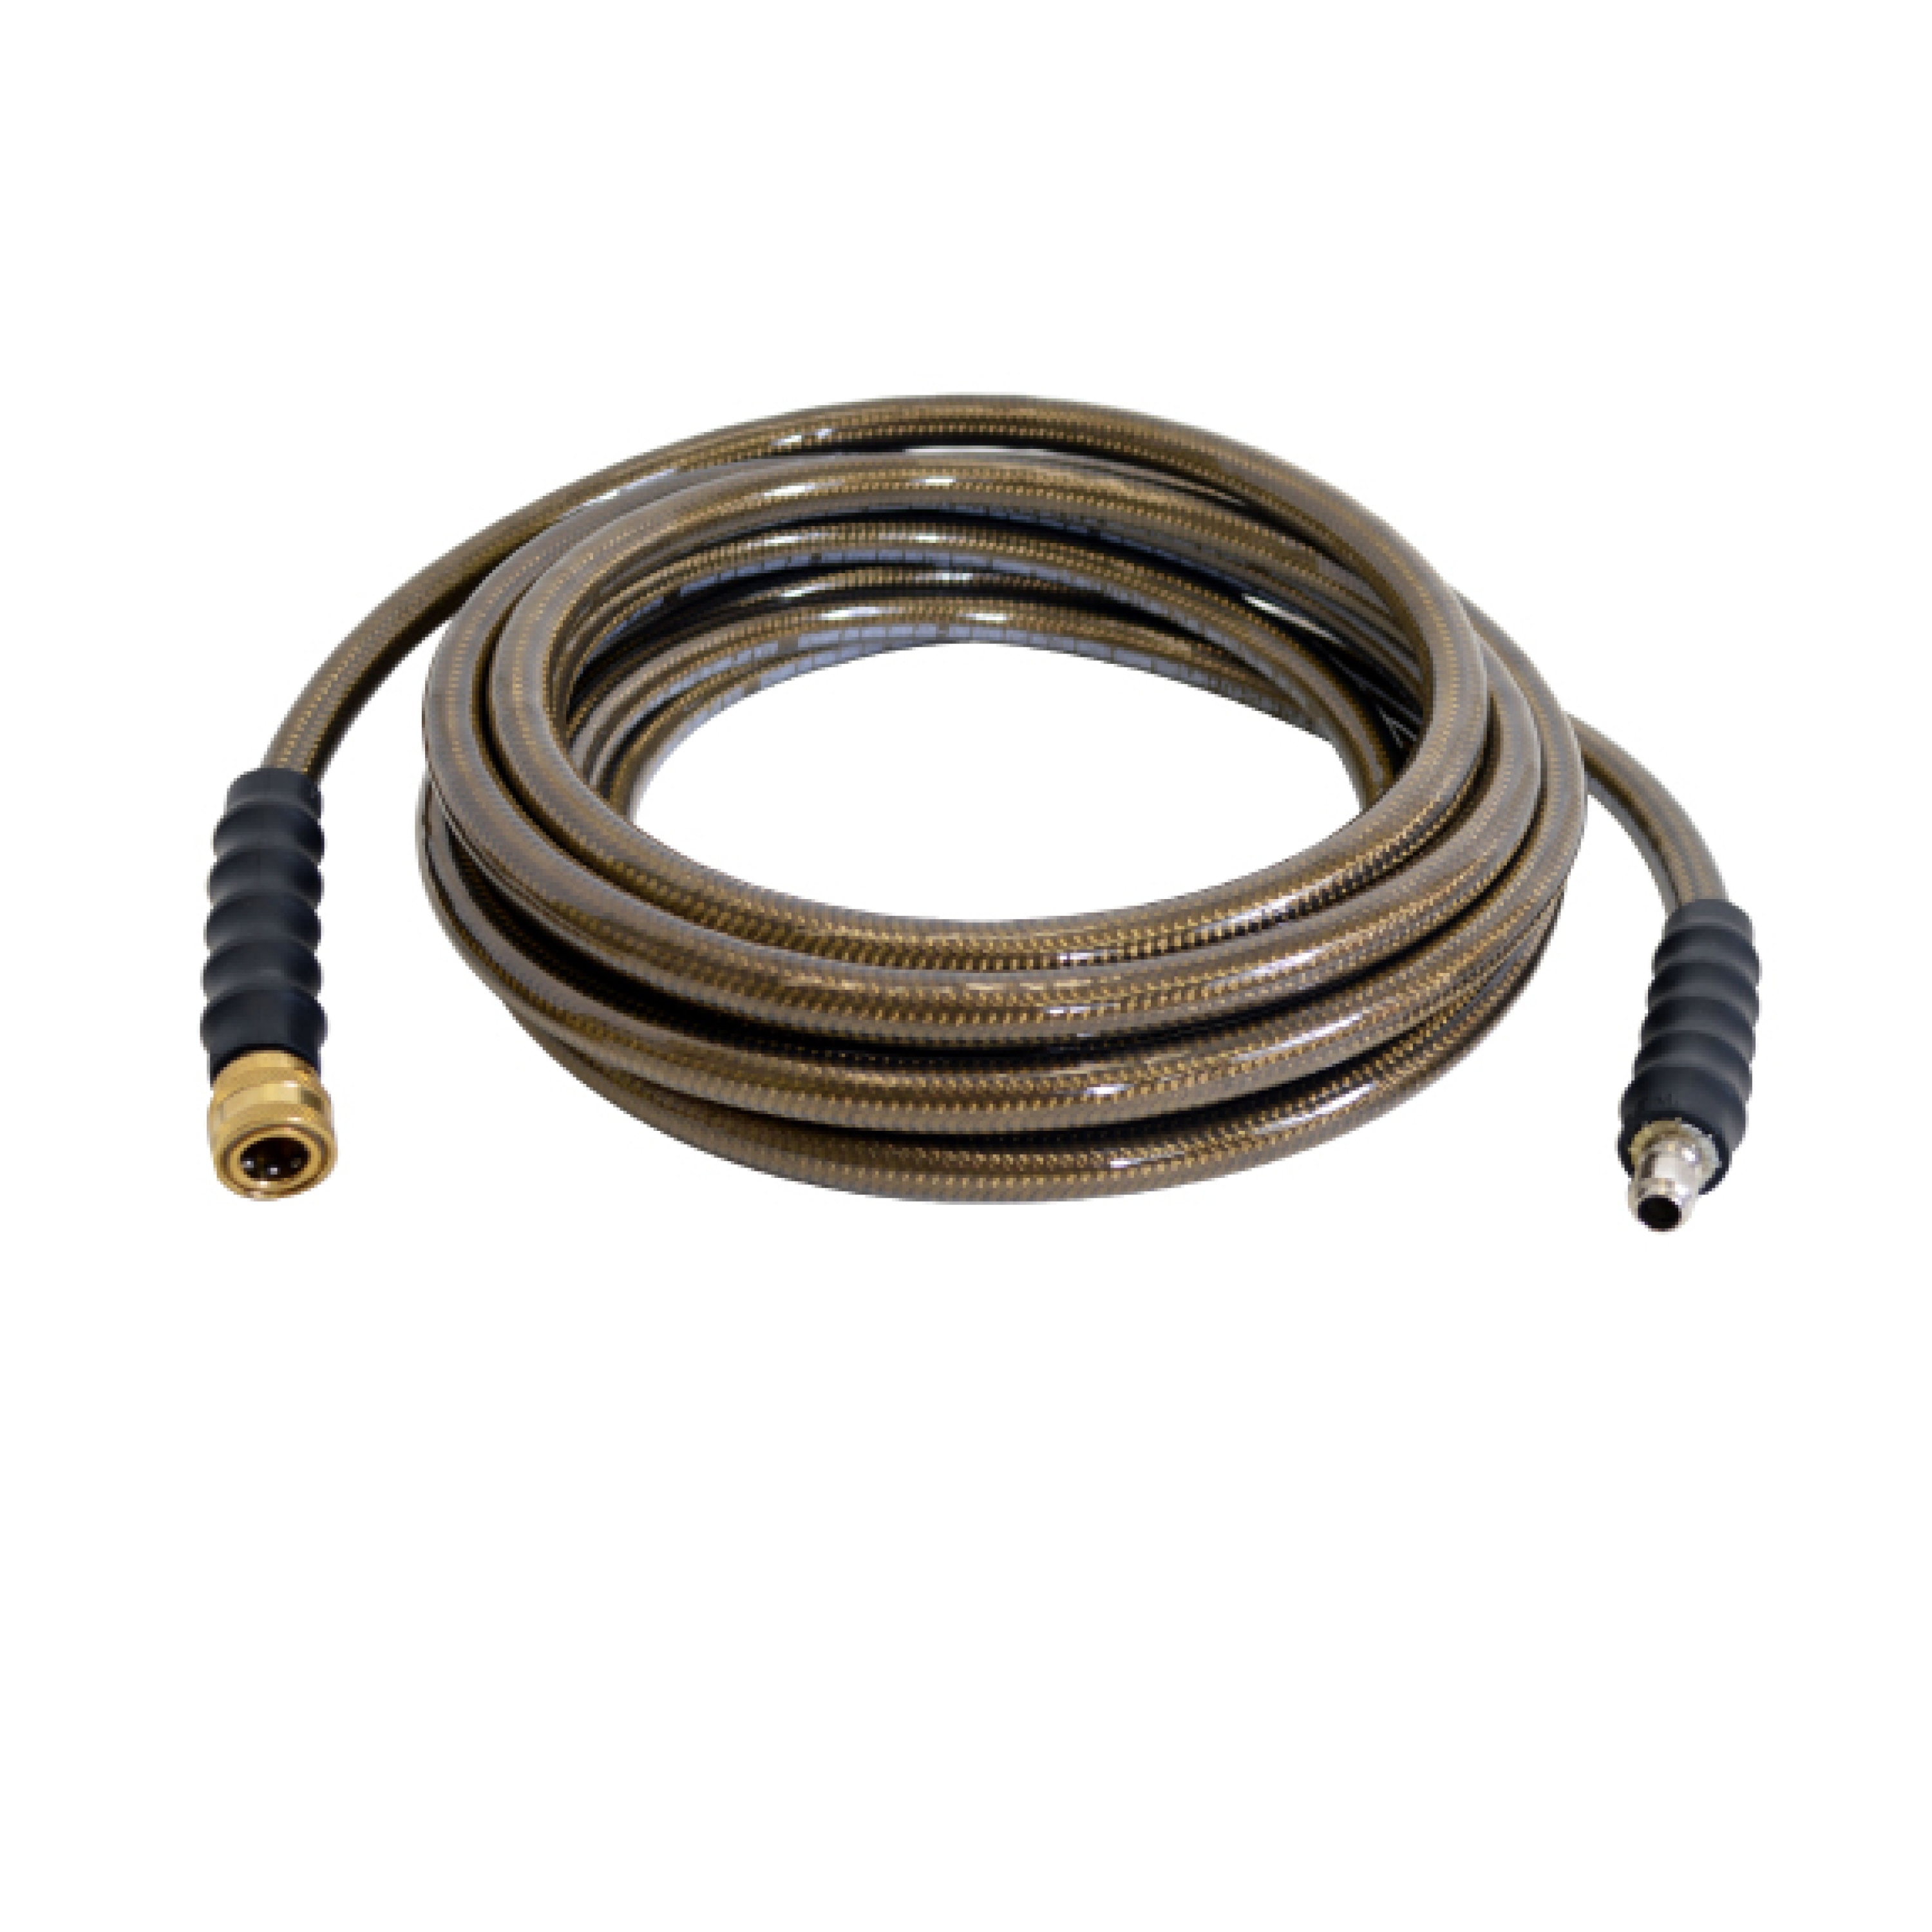 Monster Hose 3/8-in x 50-ft Pressure Washer Hose Polyester in Gold | - SIMPSON 41028